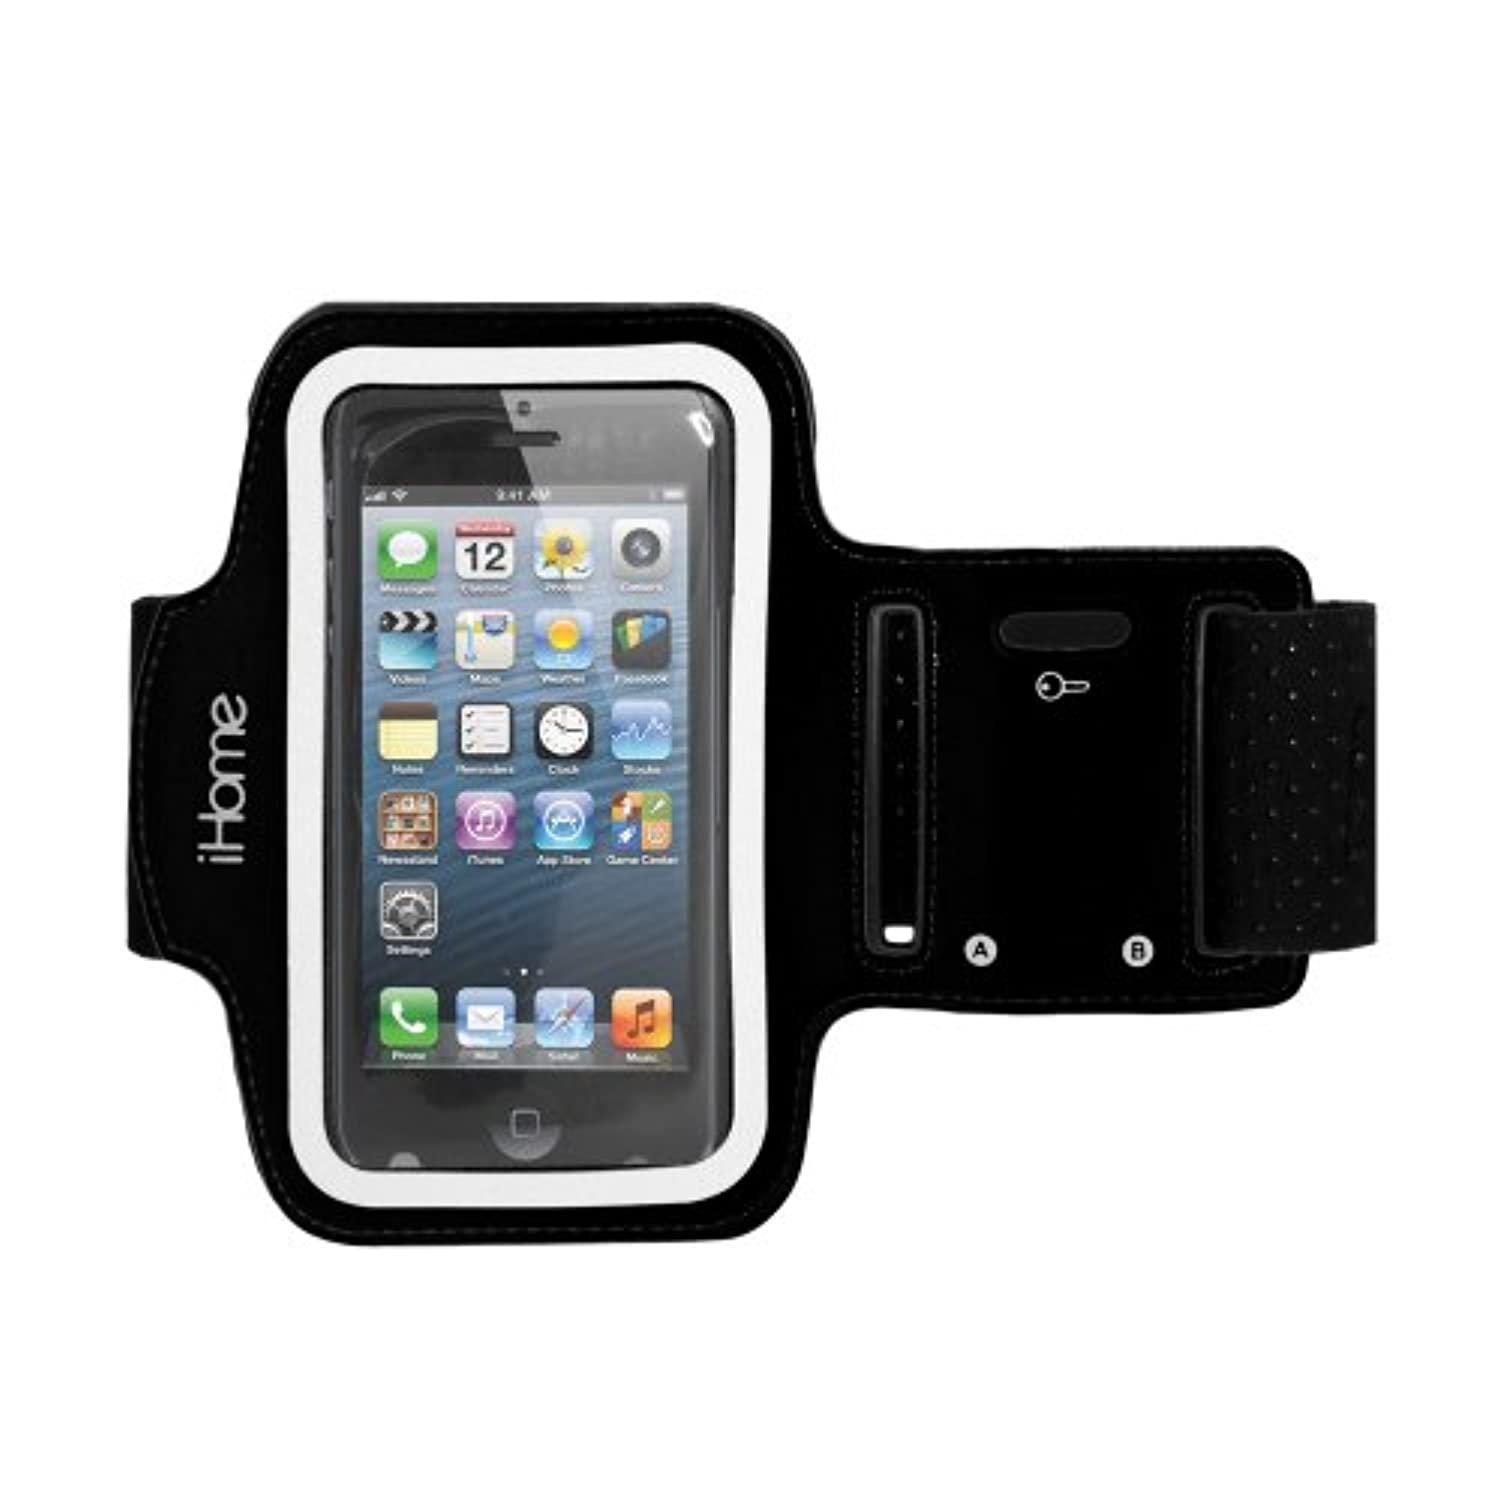 ihome ih-5p141b sport armband for iphone 4/4s/5 and ipod touch, black